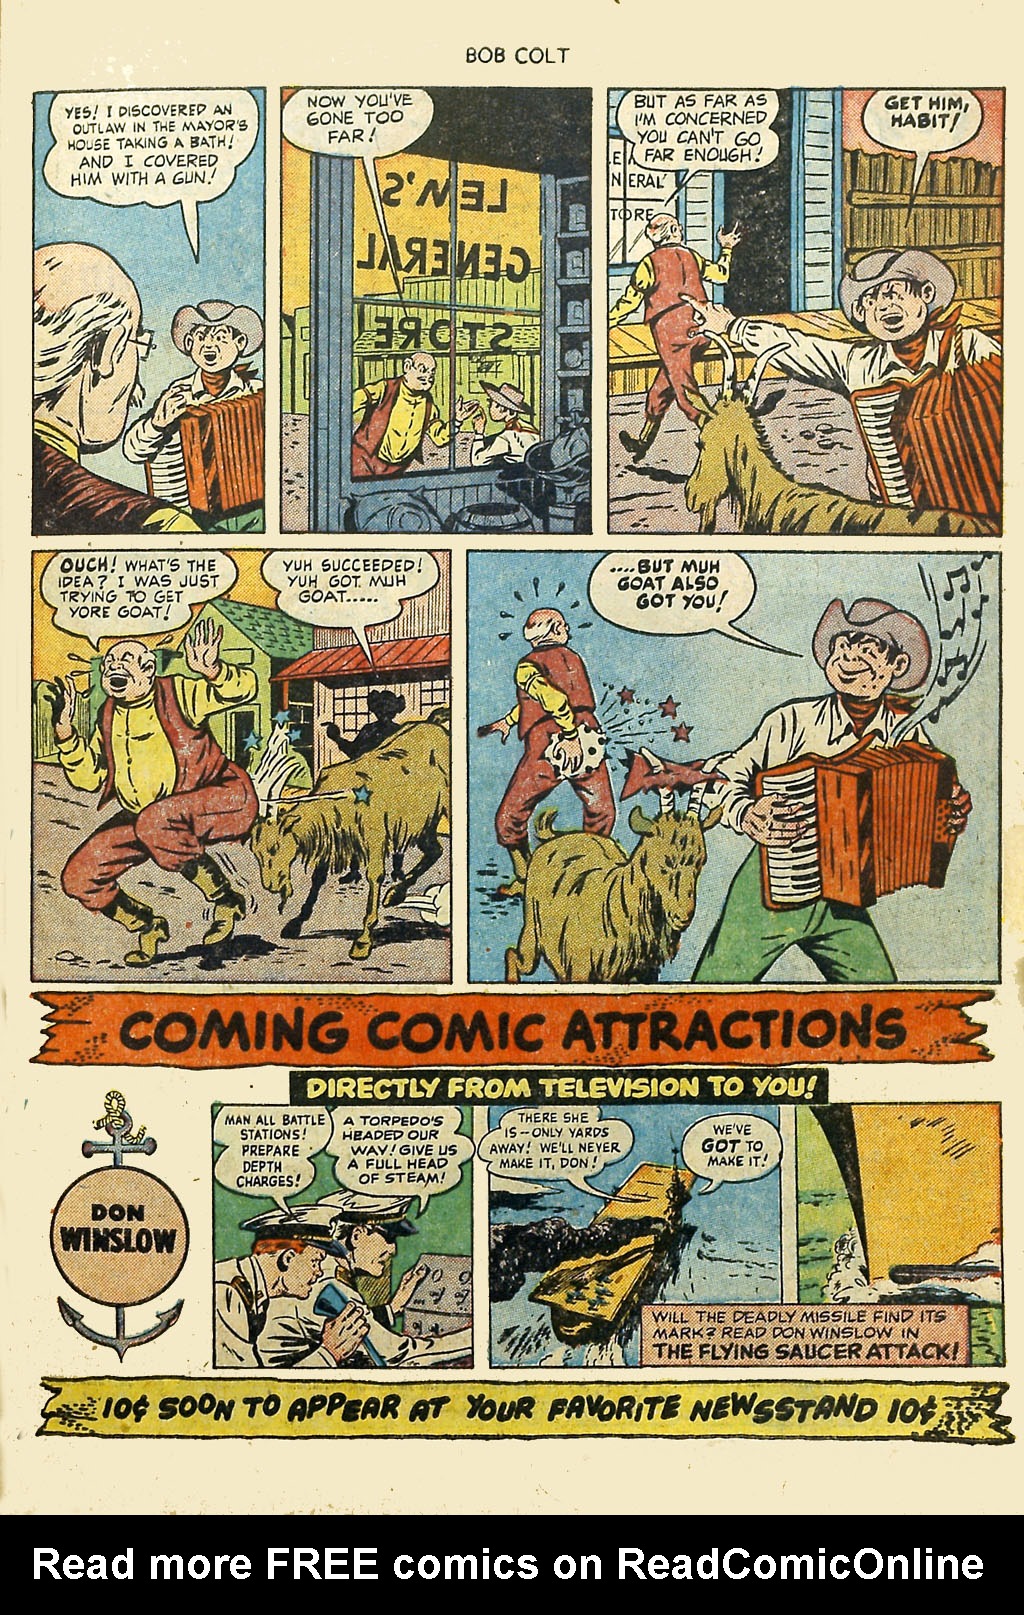 Read online Bob Colt Western comic -  Issue #2 - 27